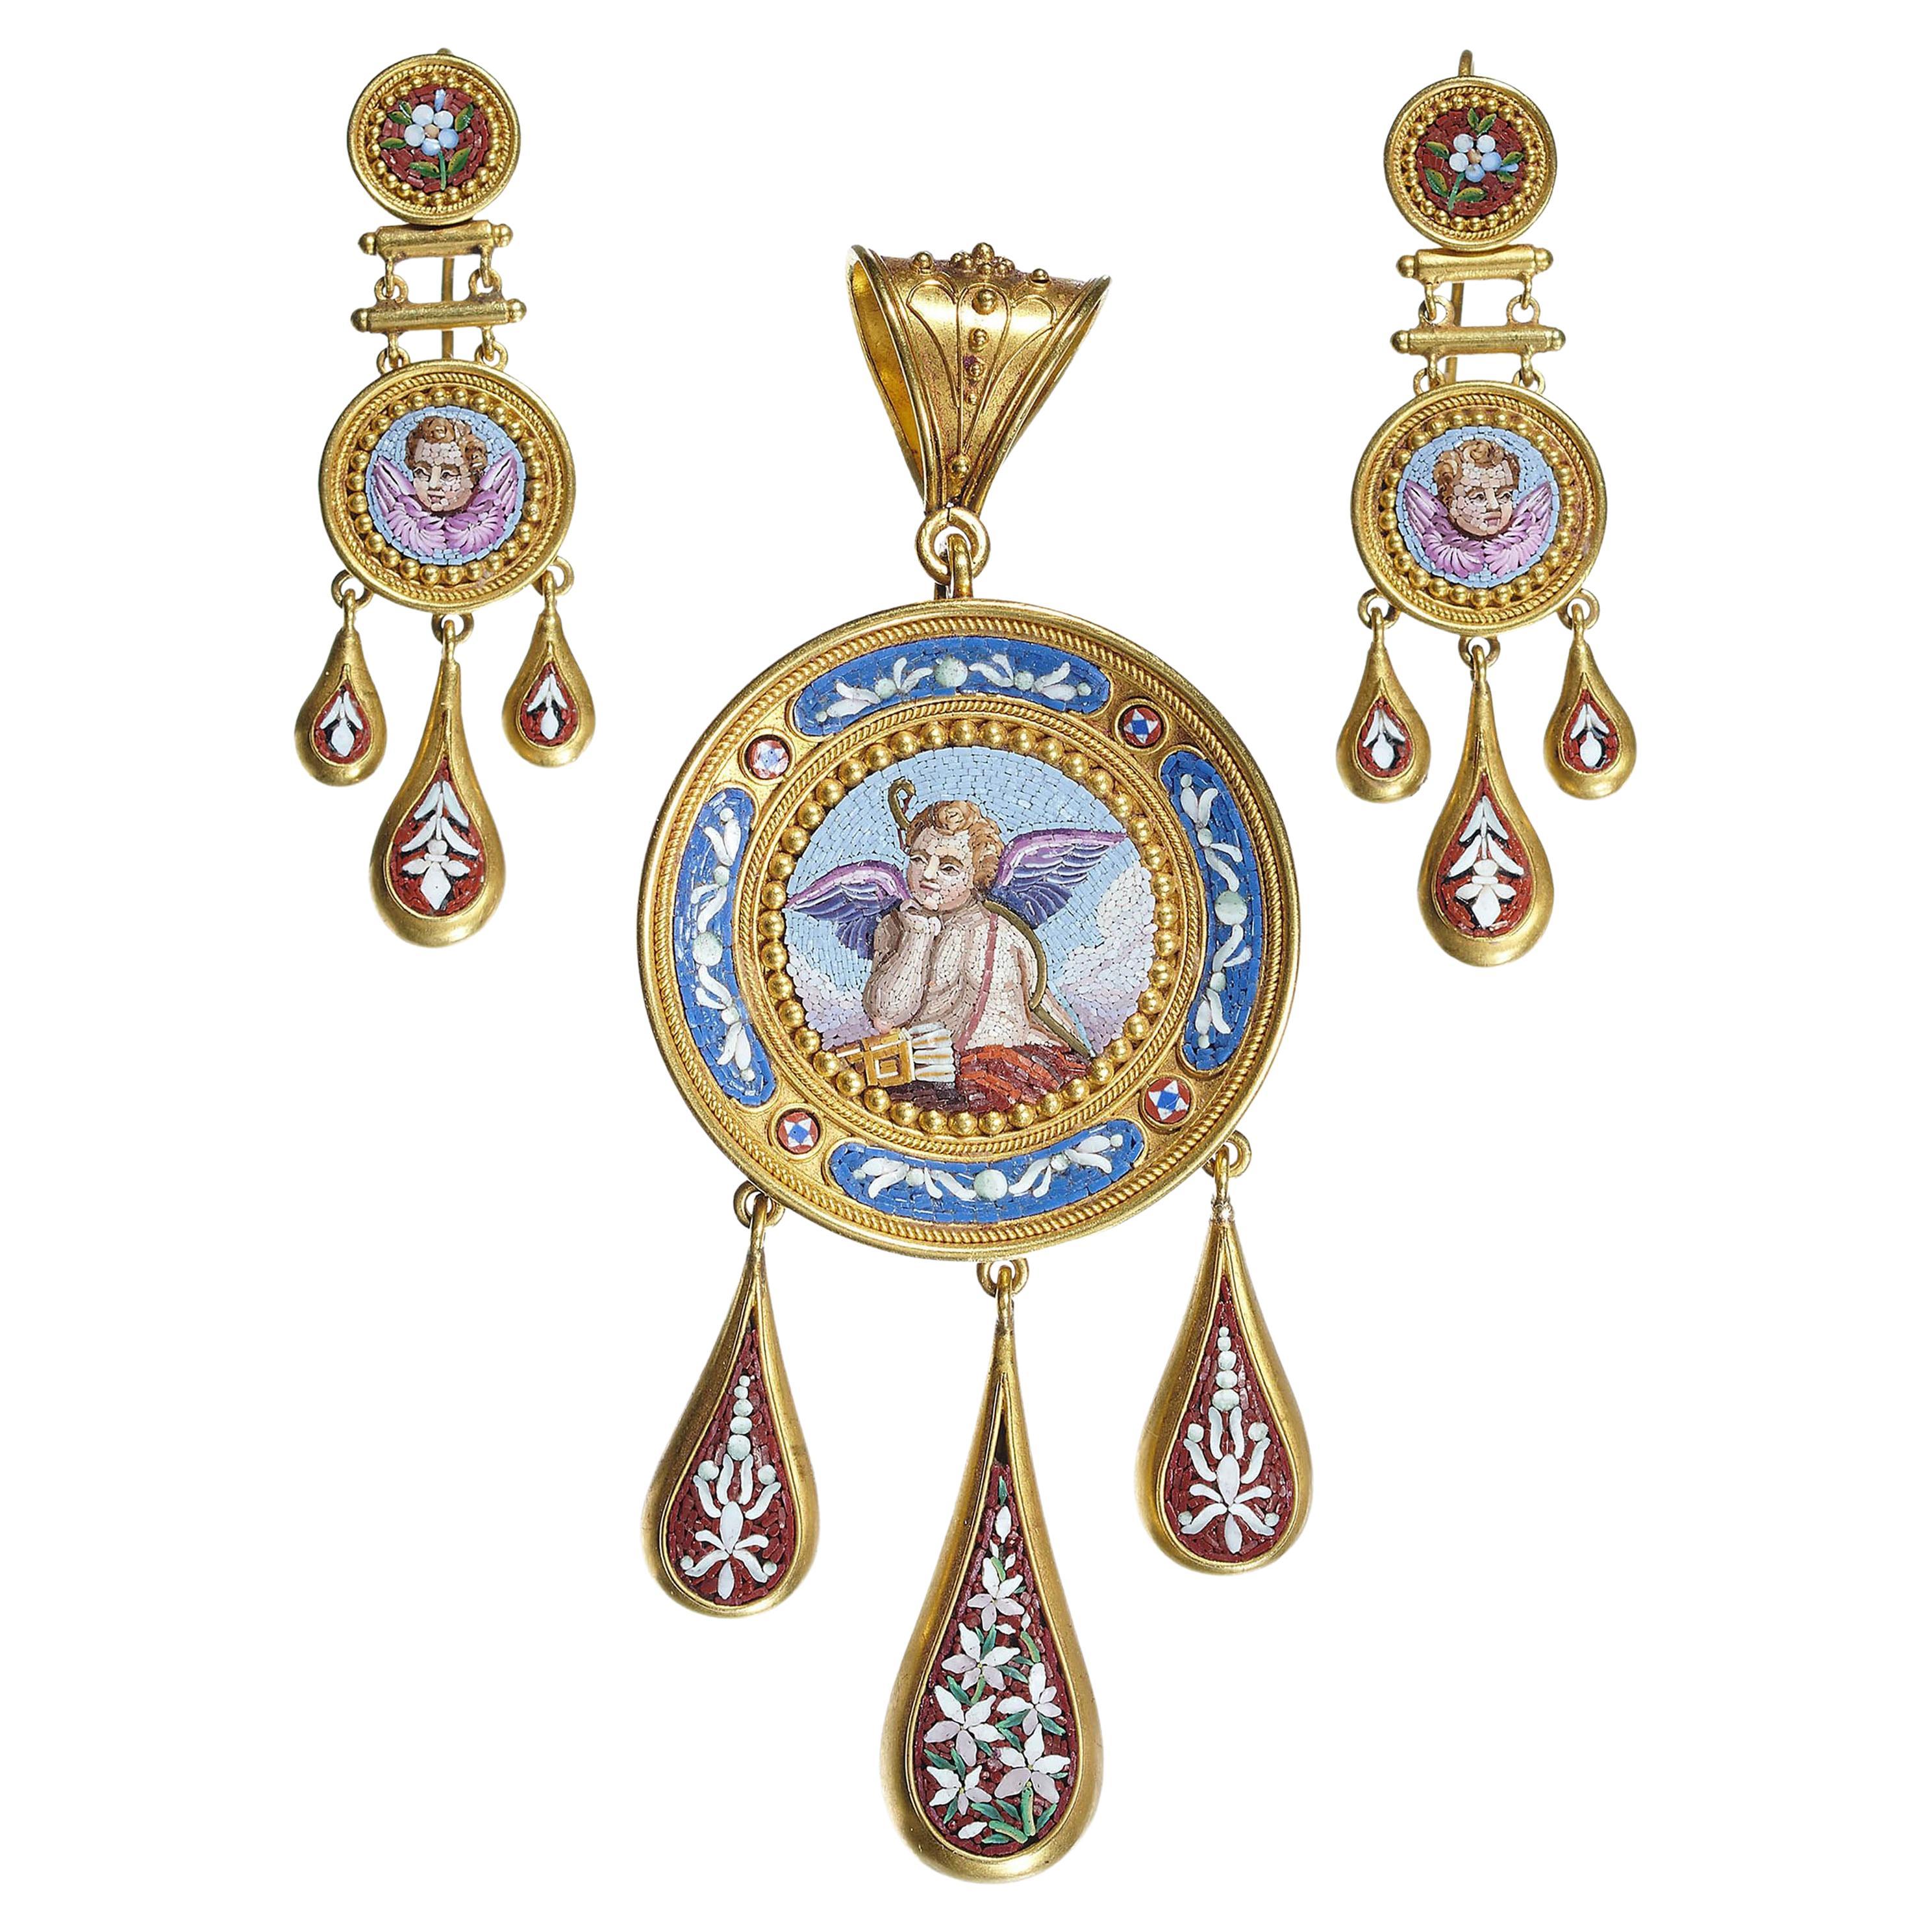 Antique Italian Micromosaic Gold Brooch-Pendant And Earrings Suite, Circa 1840